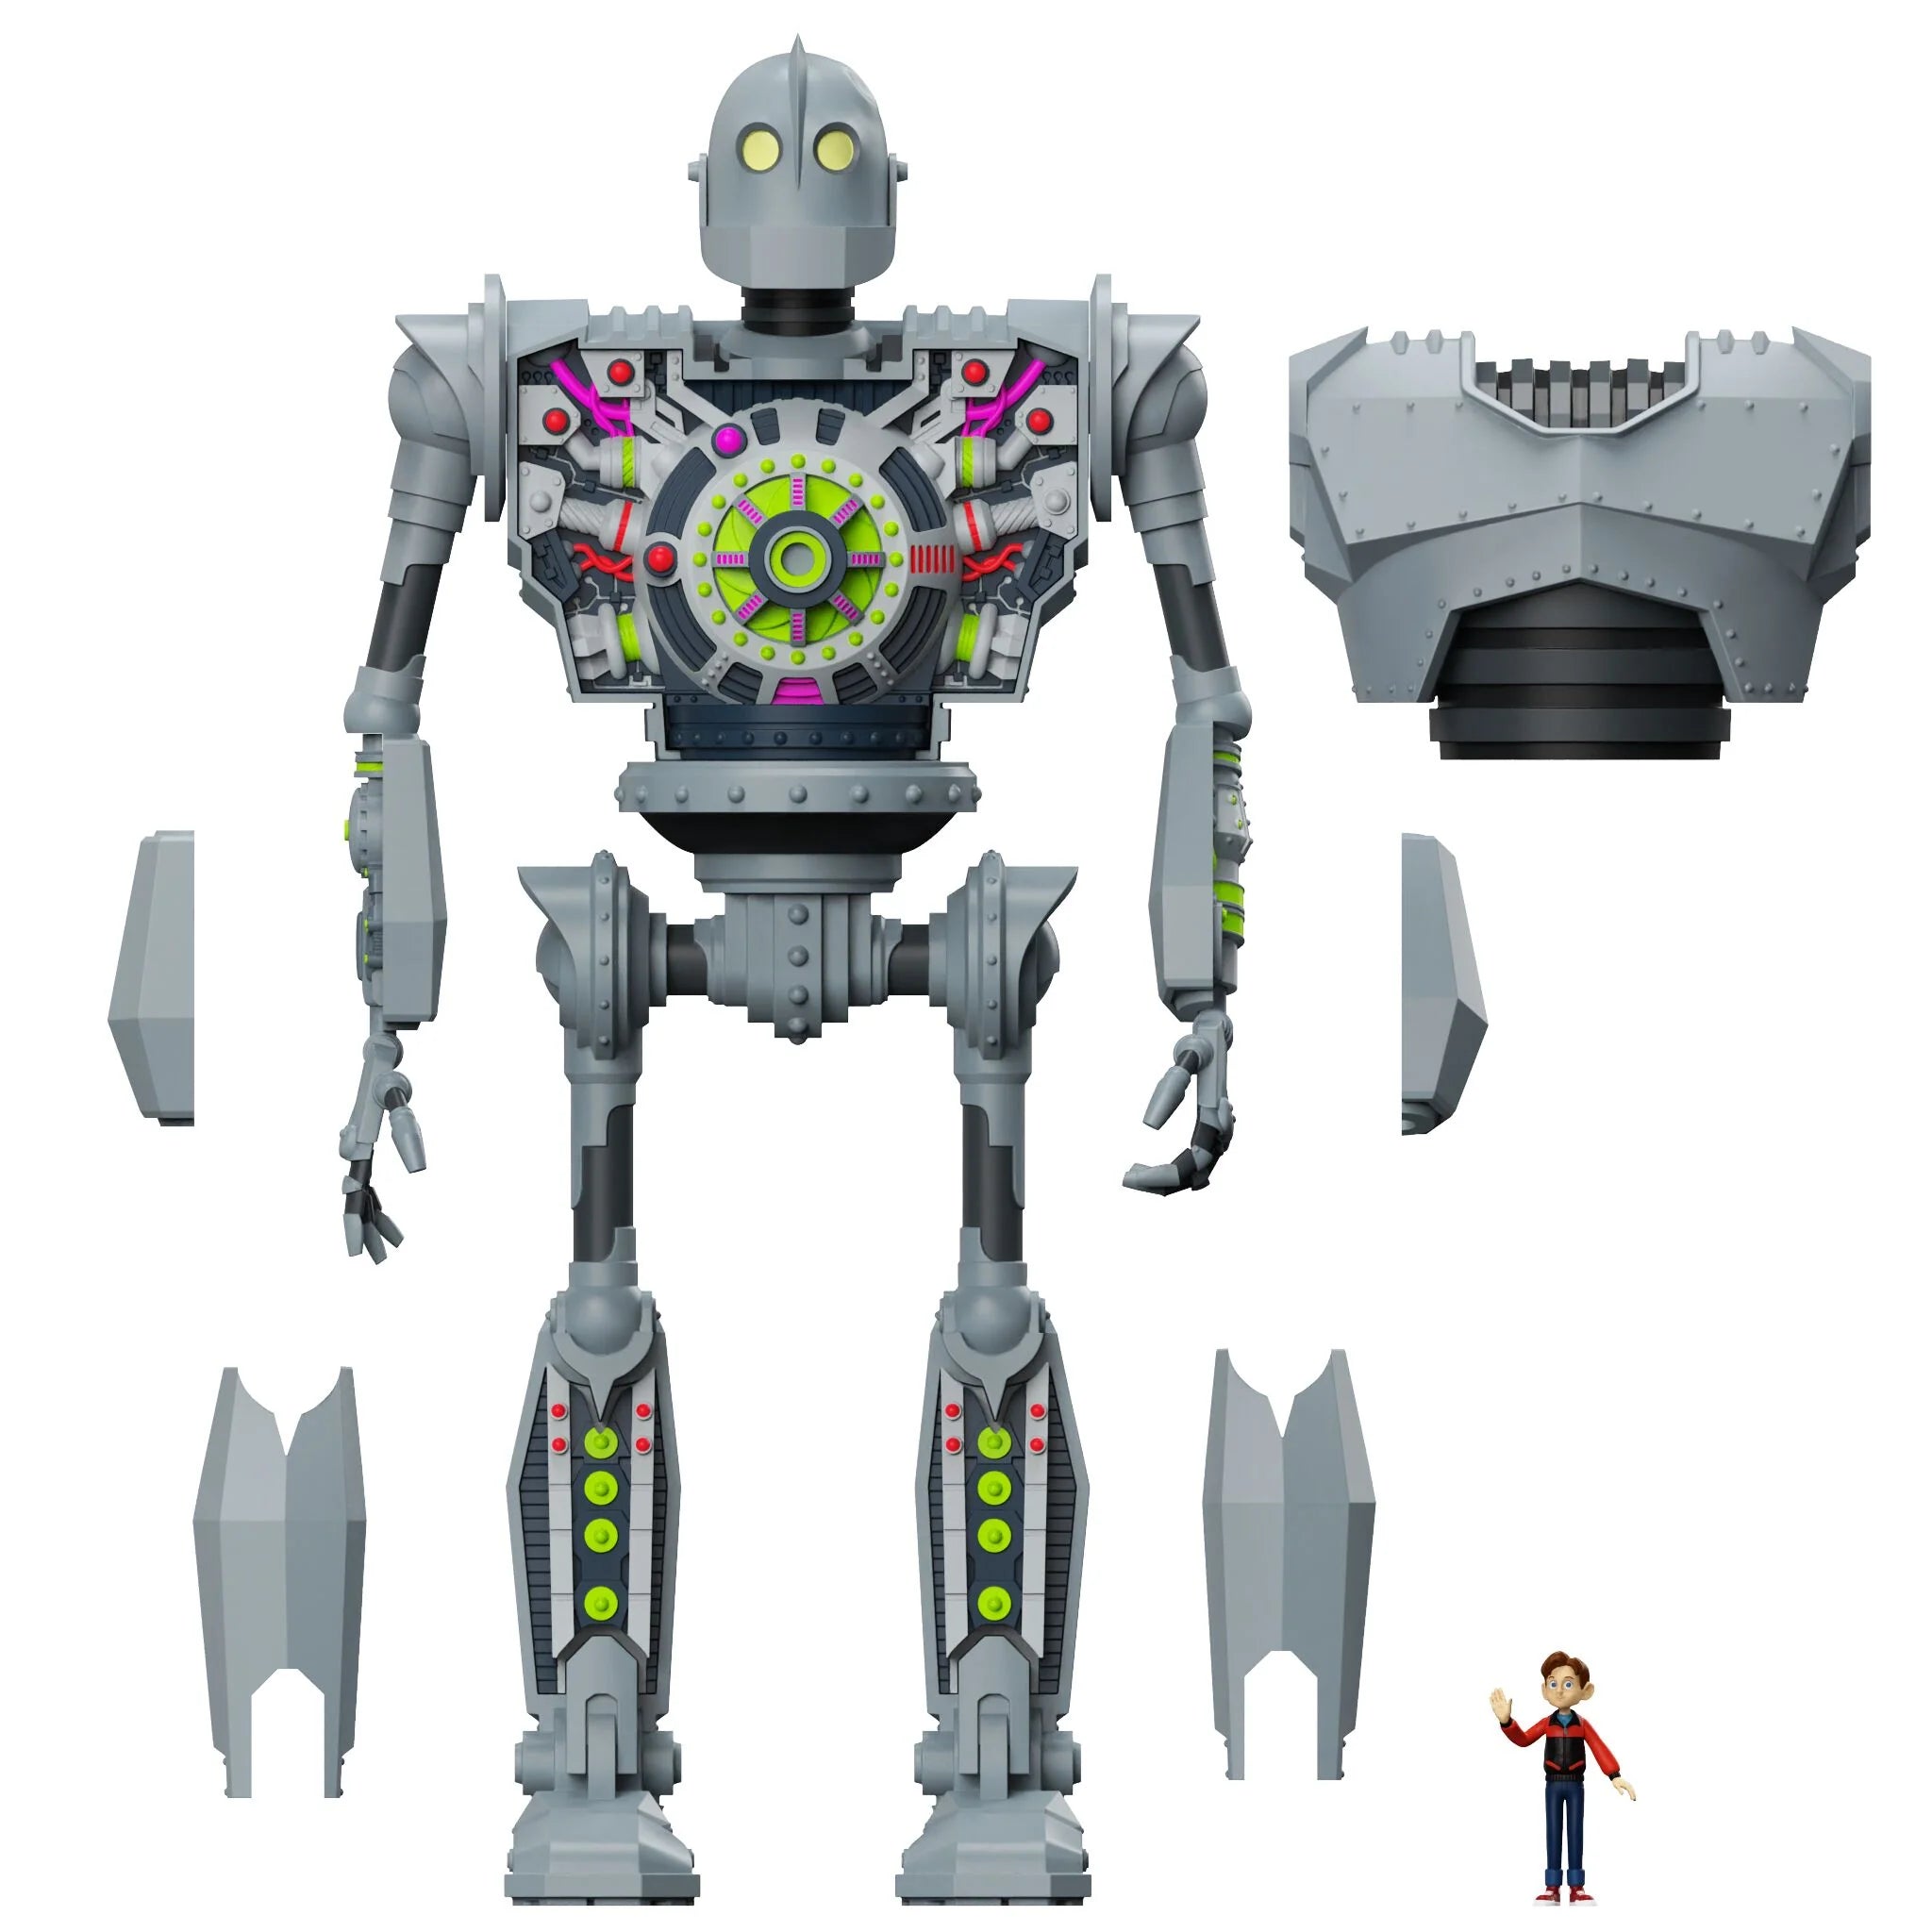 Super7 - Iron Giant - The Iron Giant Super Cyborg (Full Color ver.)